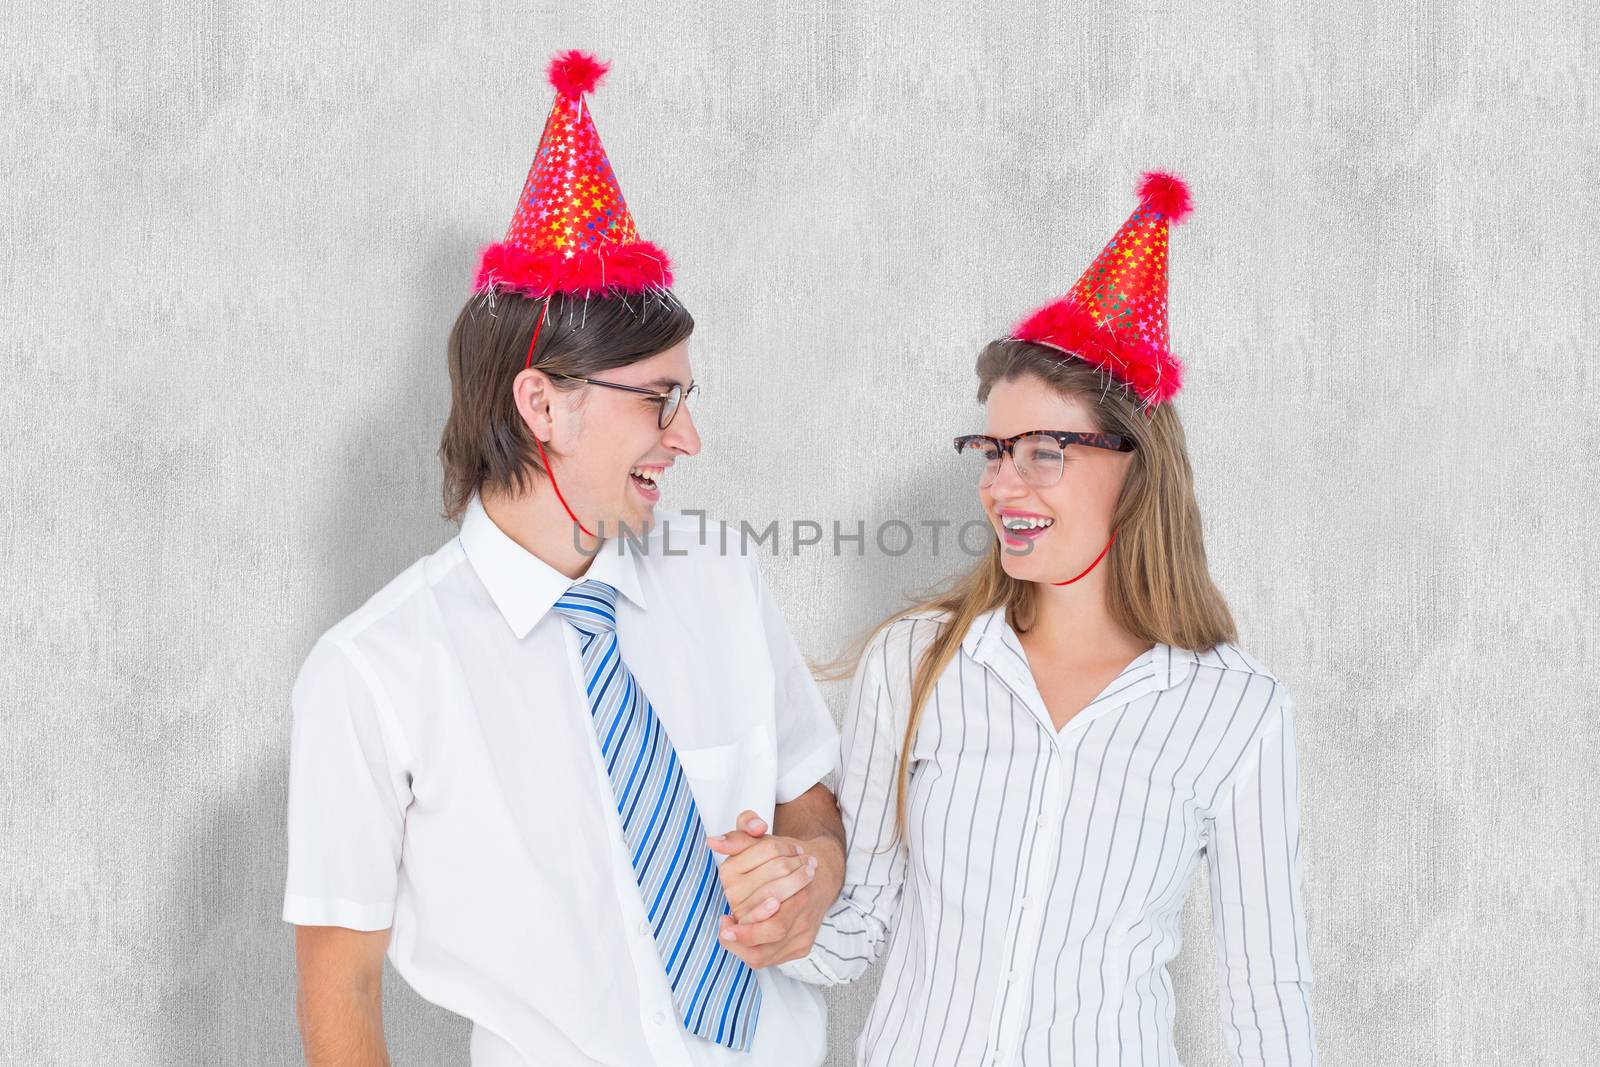 Happy geeky hipster couple with party hat  against white background